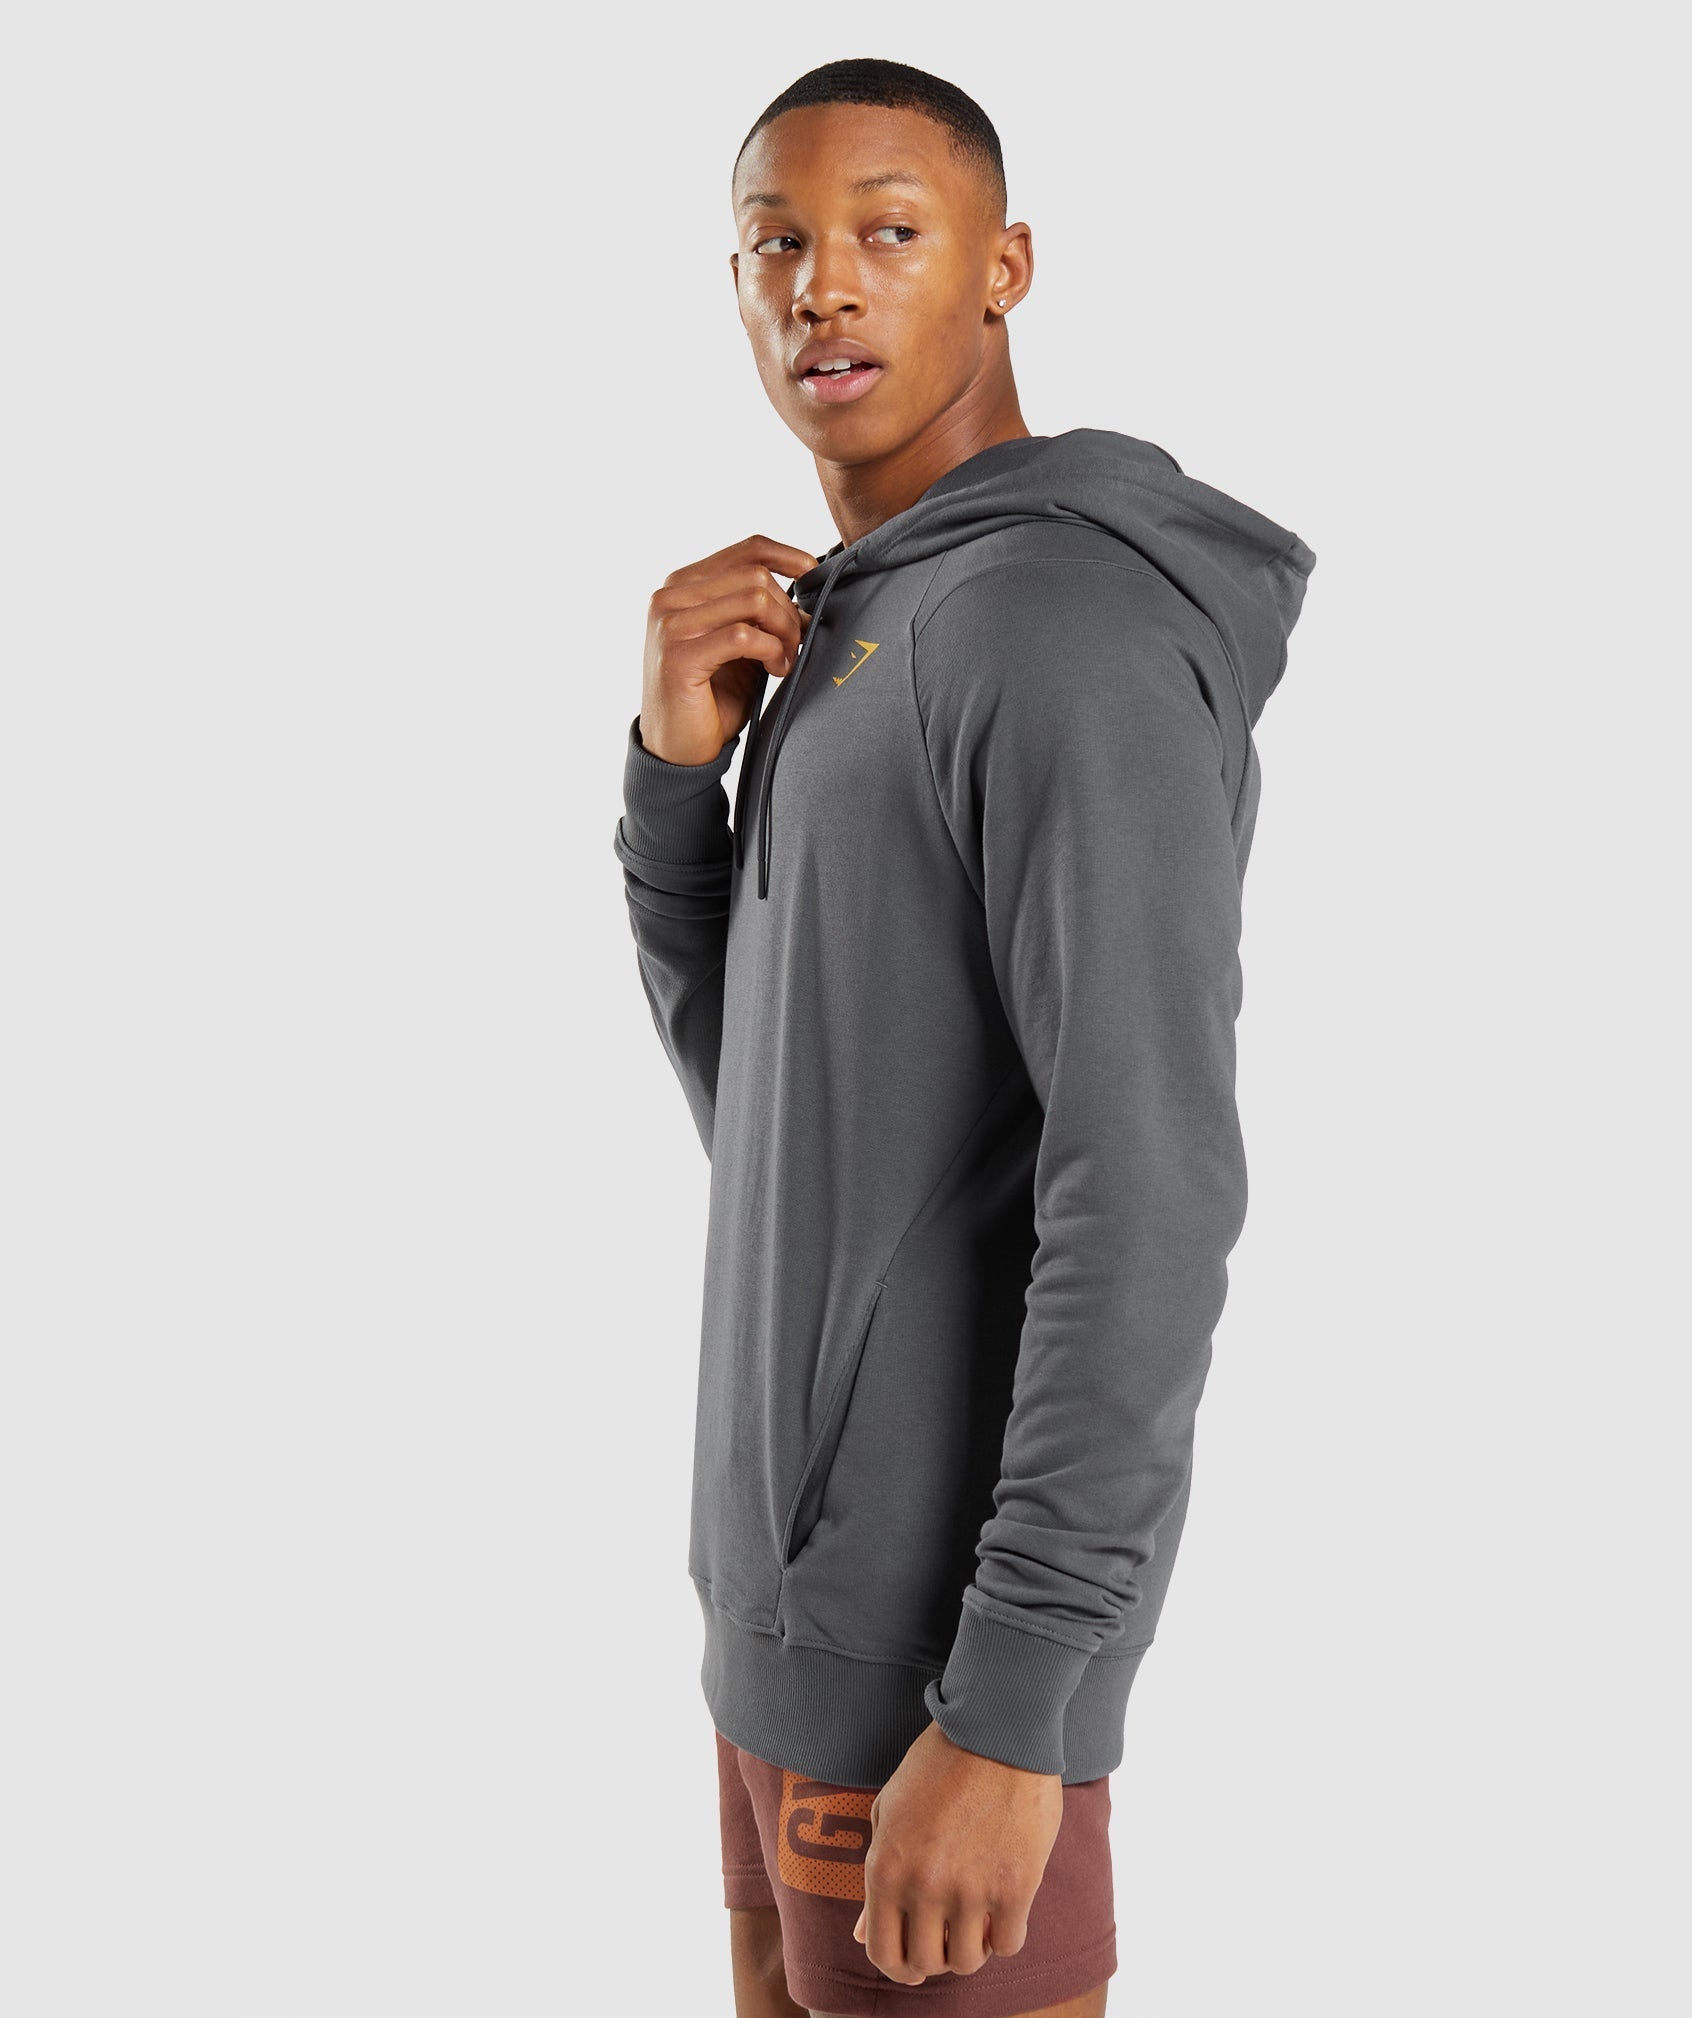 Gymshark - Out of this world. Order the impeccable Onyx Seamless Hooded top  in charcoal now. Only on www.gymshark.com